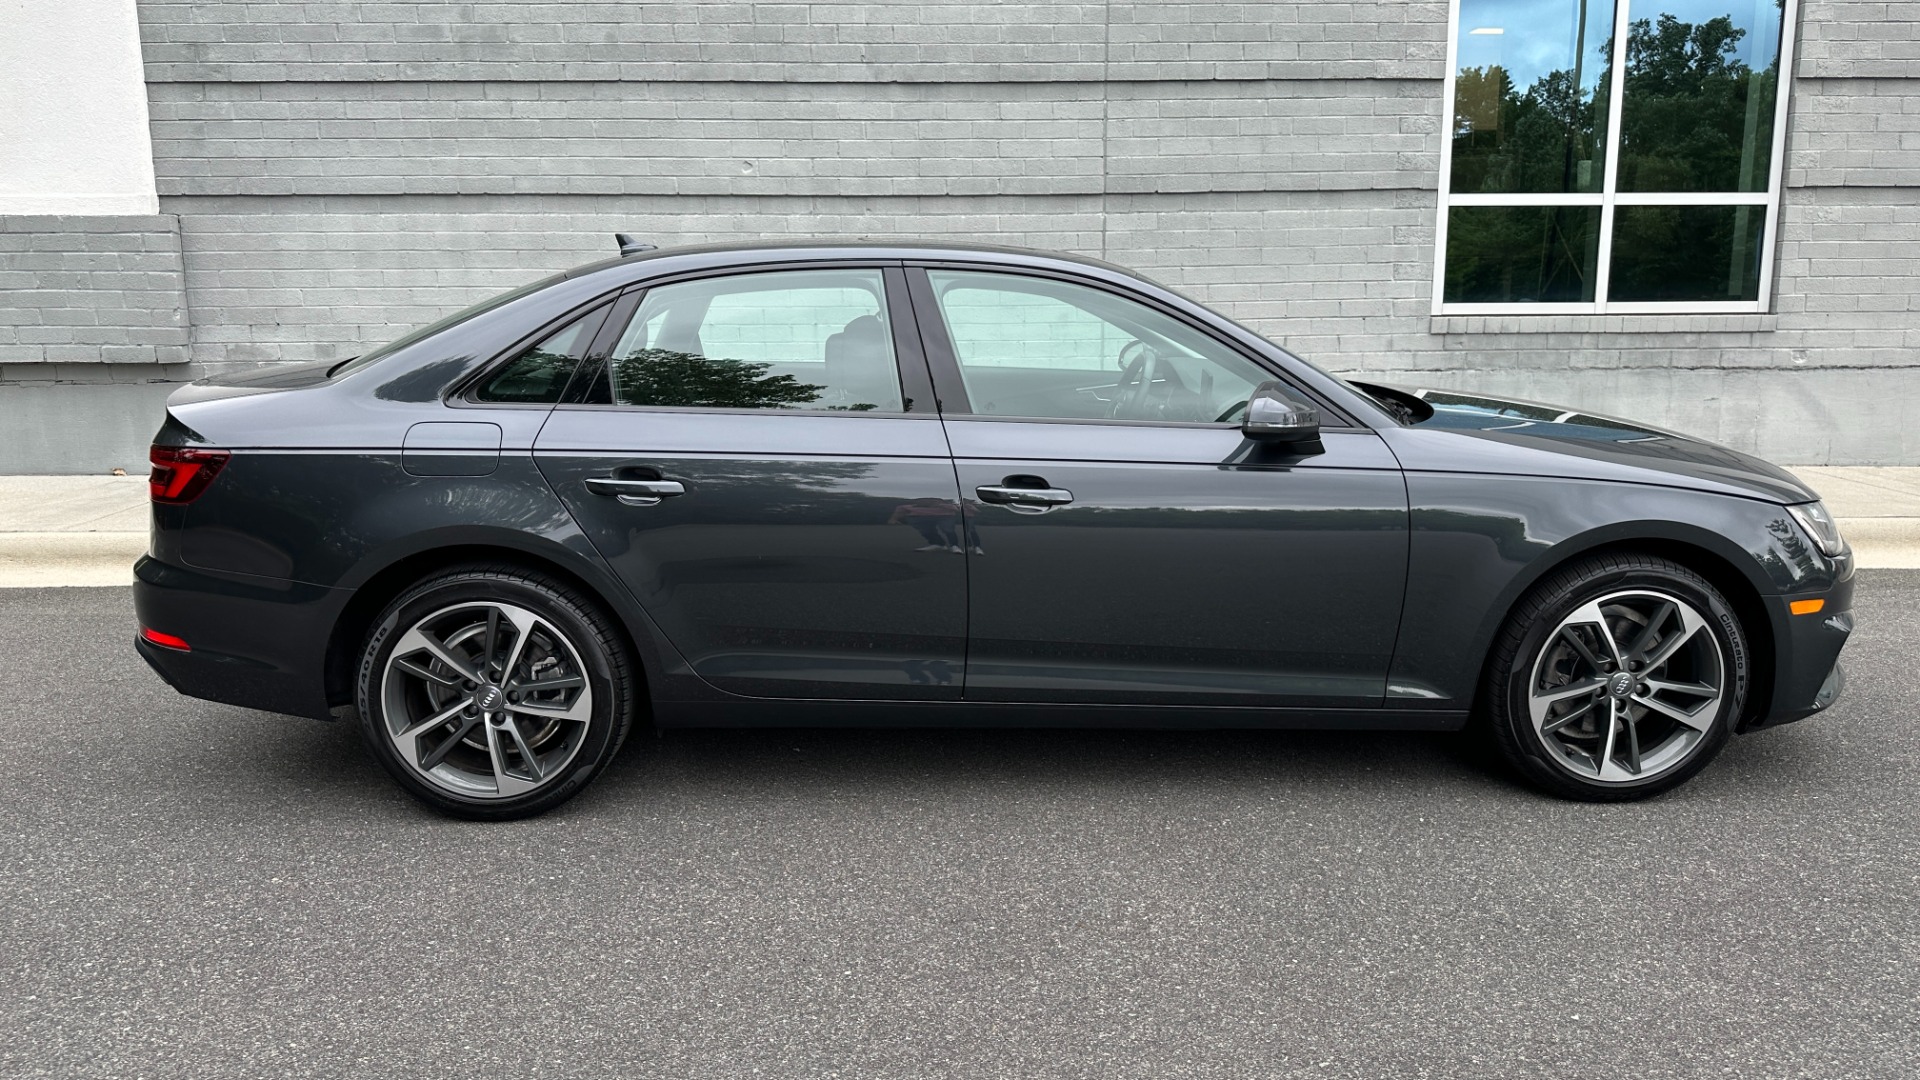 Used 2019 Audi A4 PREMIUM / AUDI BEAM RINGS / AUDI GUARD / LEATHER for sale $28,250 at Formula Imports in Charlotte NC 28227 6